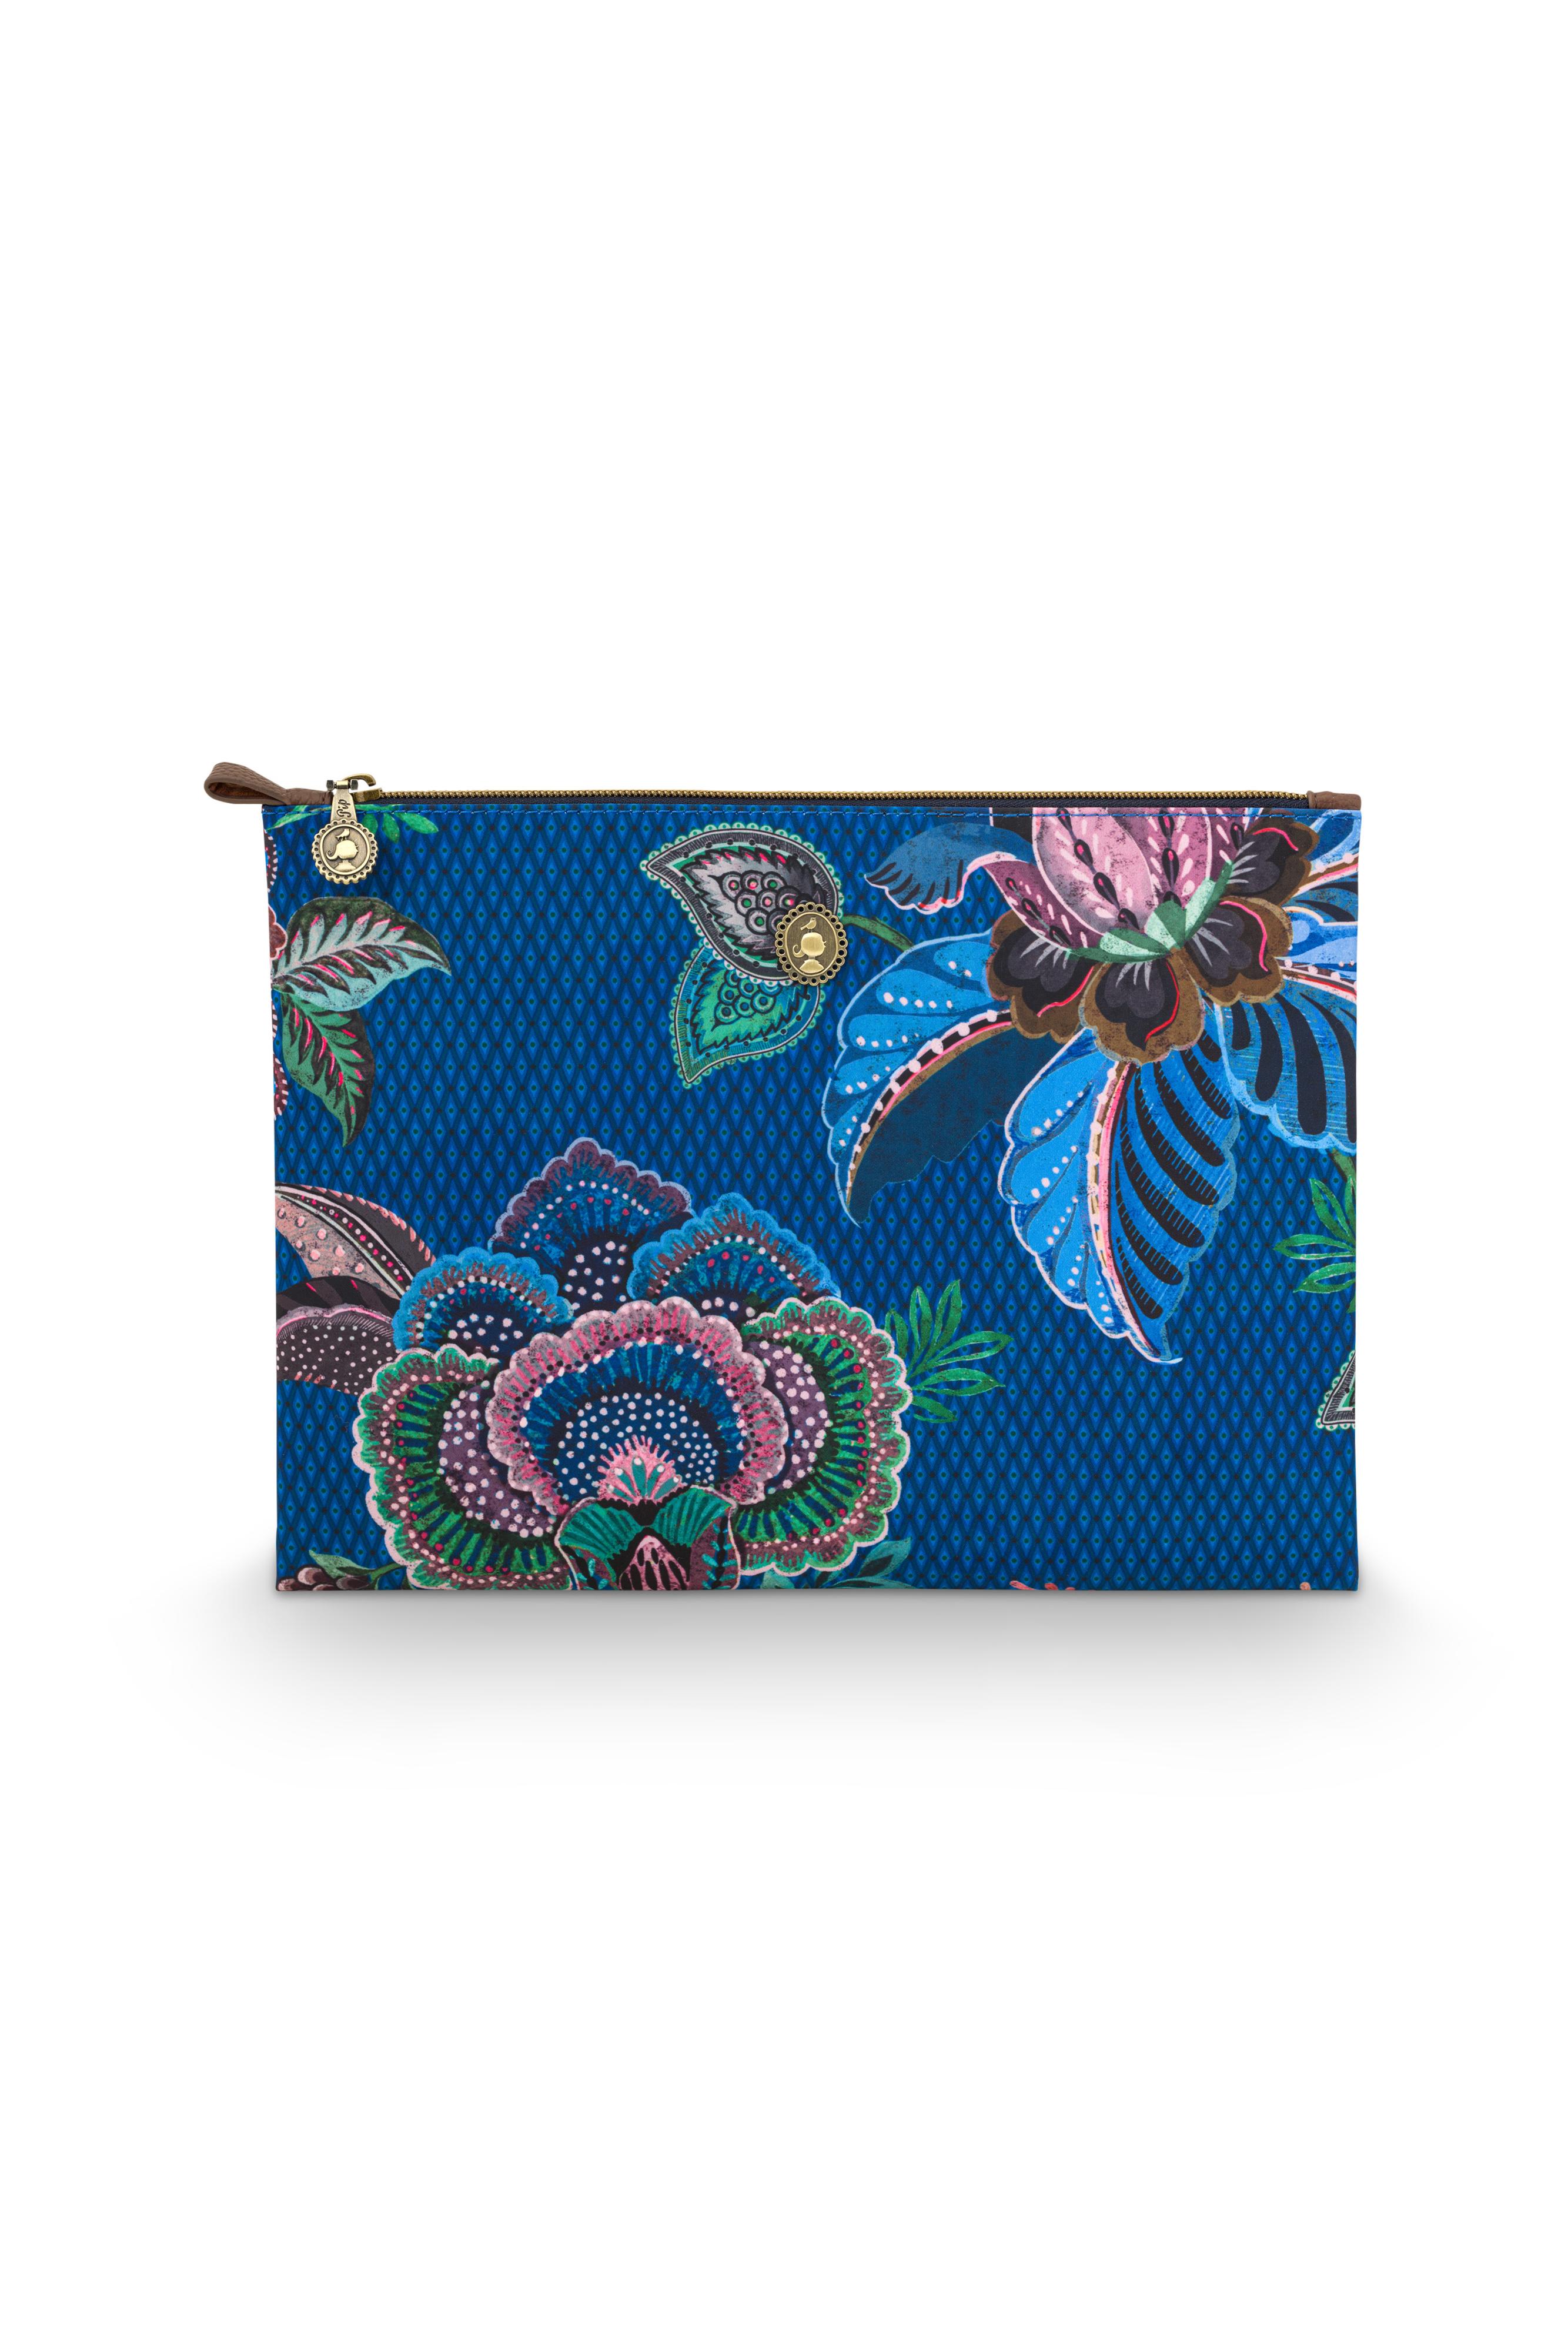 Charly Cos Flat Pouch Lg Cece Fiore Blue 30x22x1 Gift